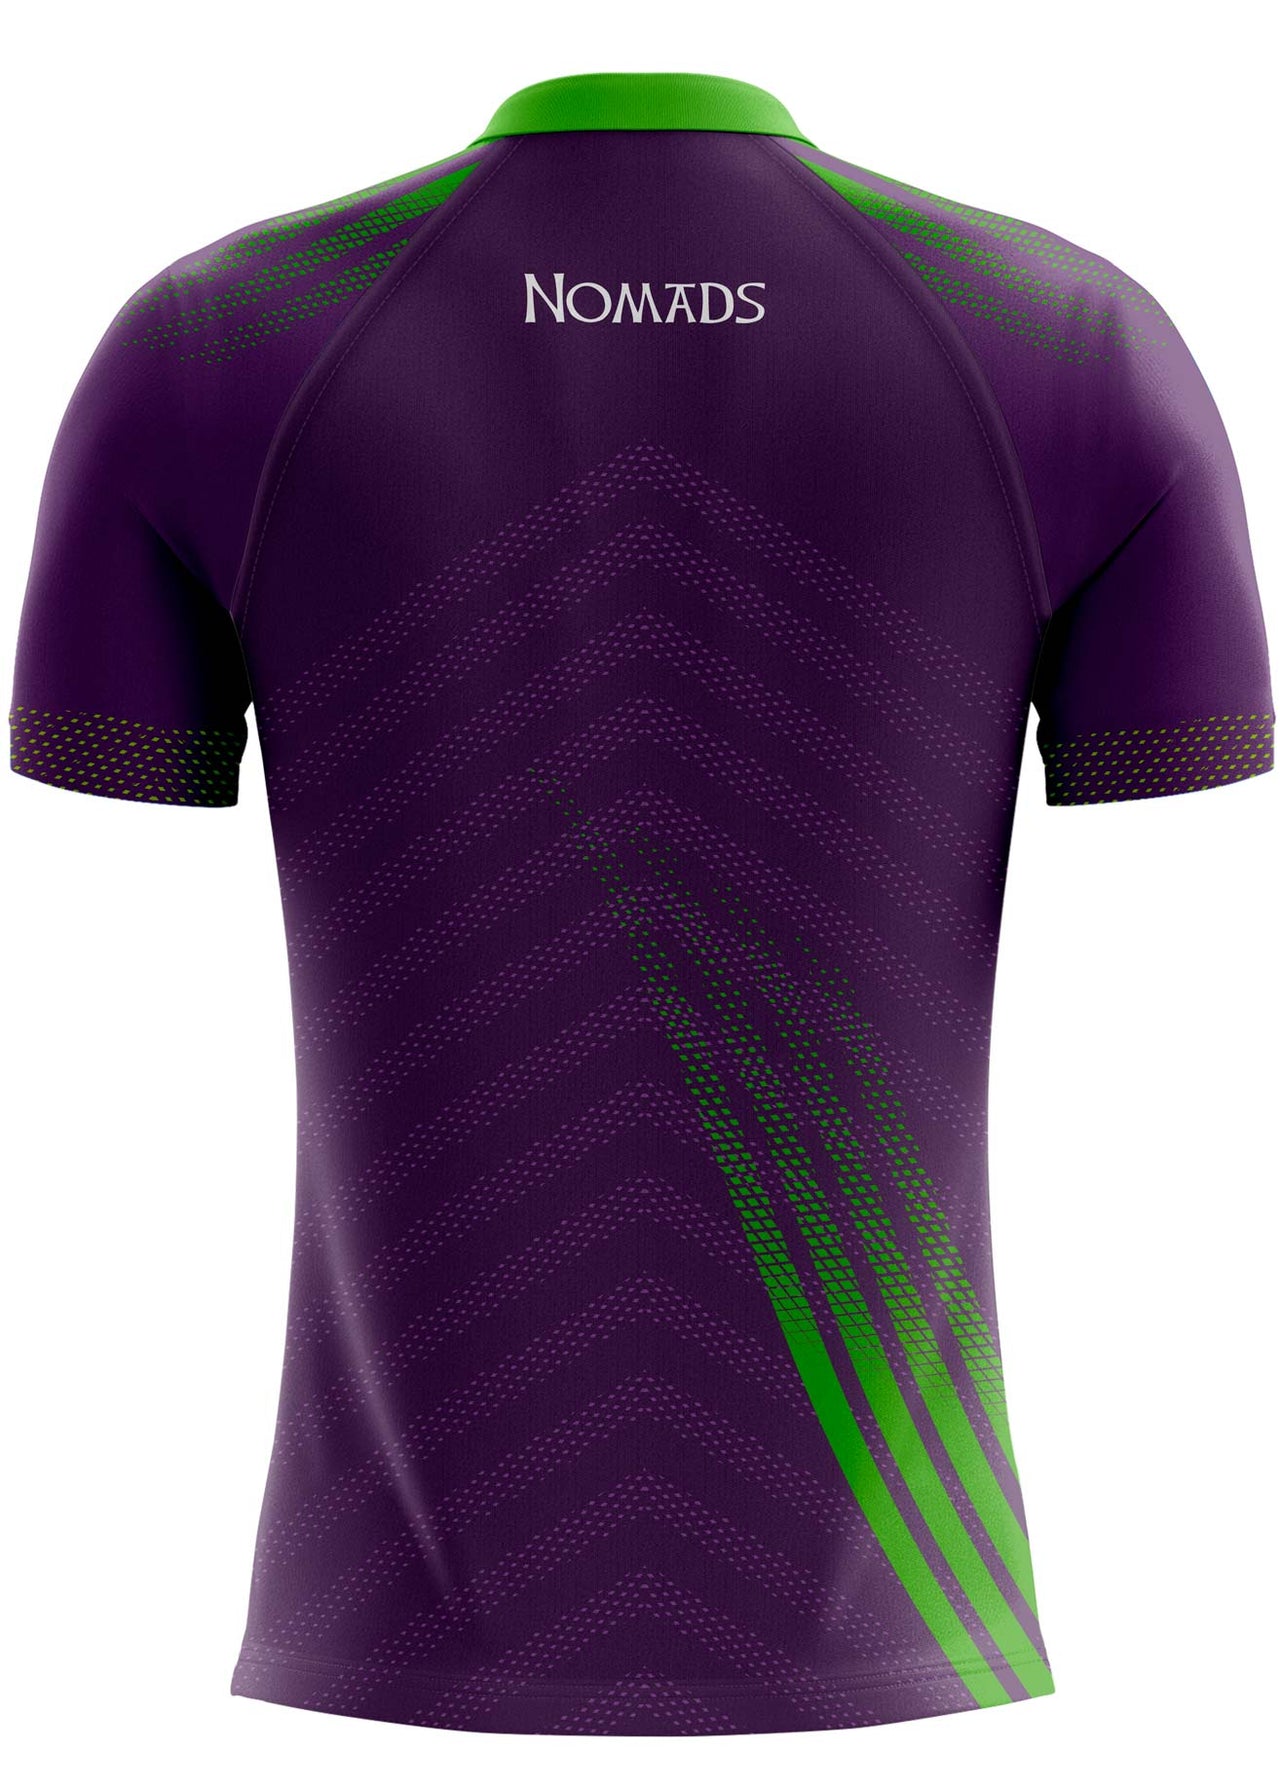 Willamette Valley Nomads Home Jersey Player Fit